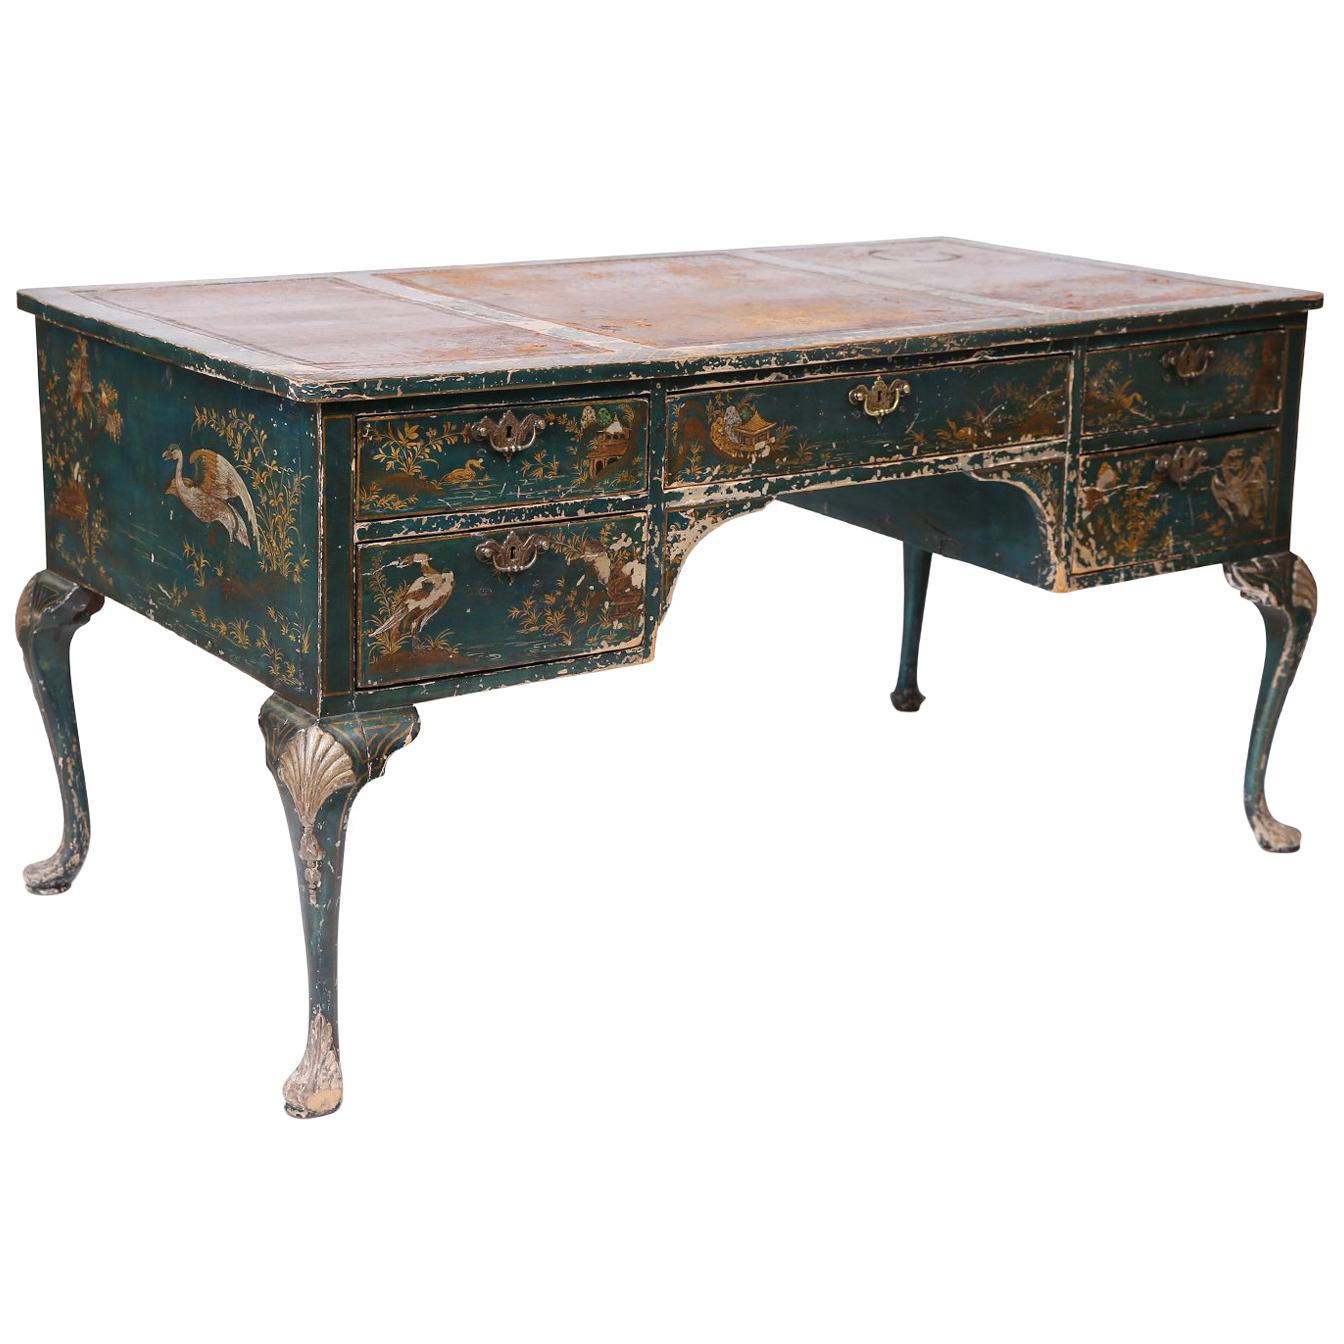 Green Turn-of-the-Century Patinated Desk